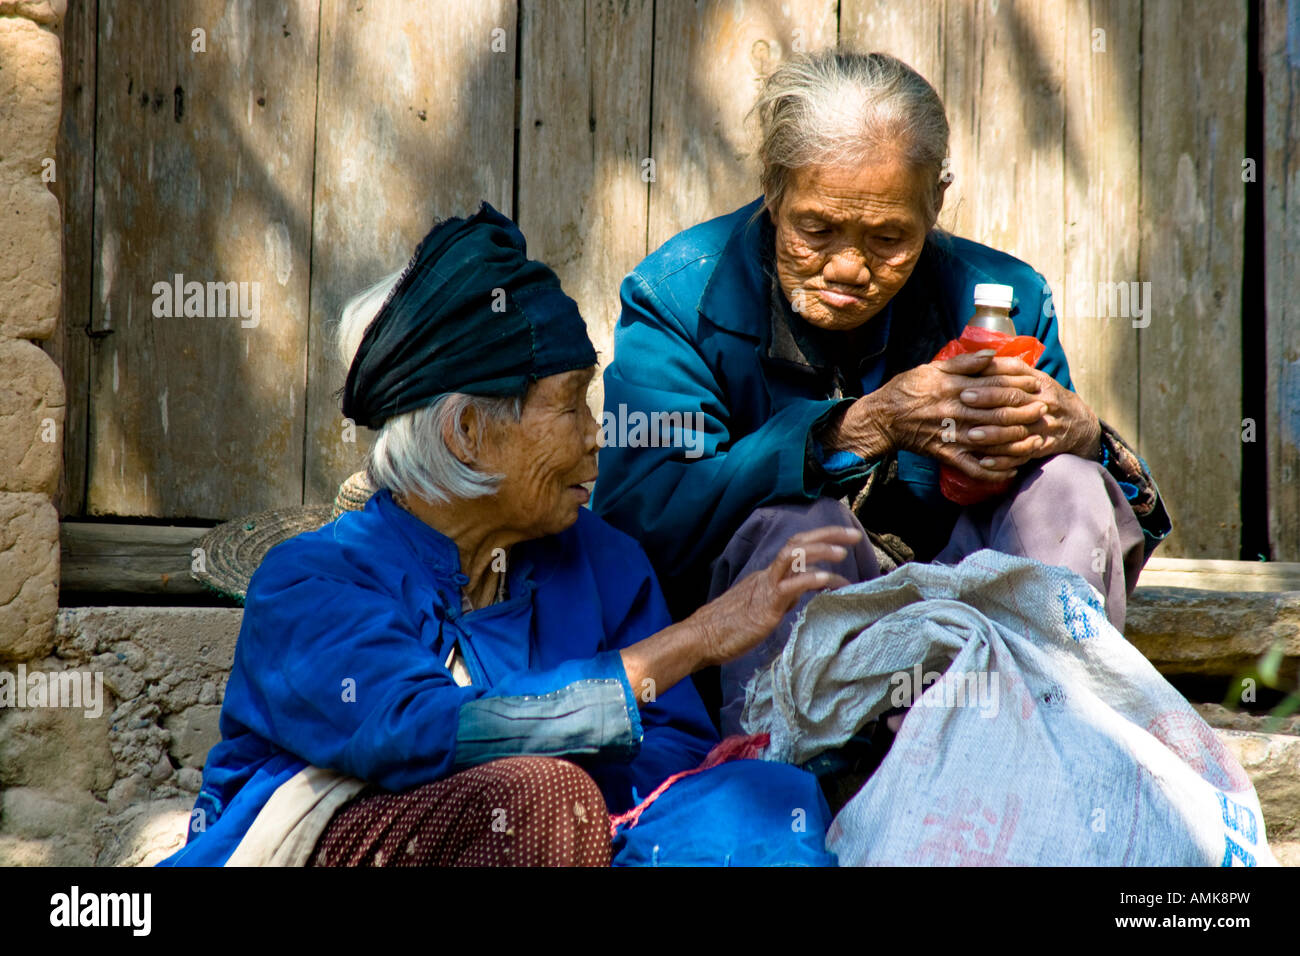 Two Old Chinese Women in the Rural Countryside town of Bai Sha near Yangshuo China Stock Photo